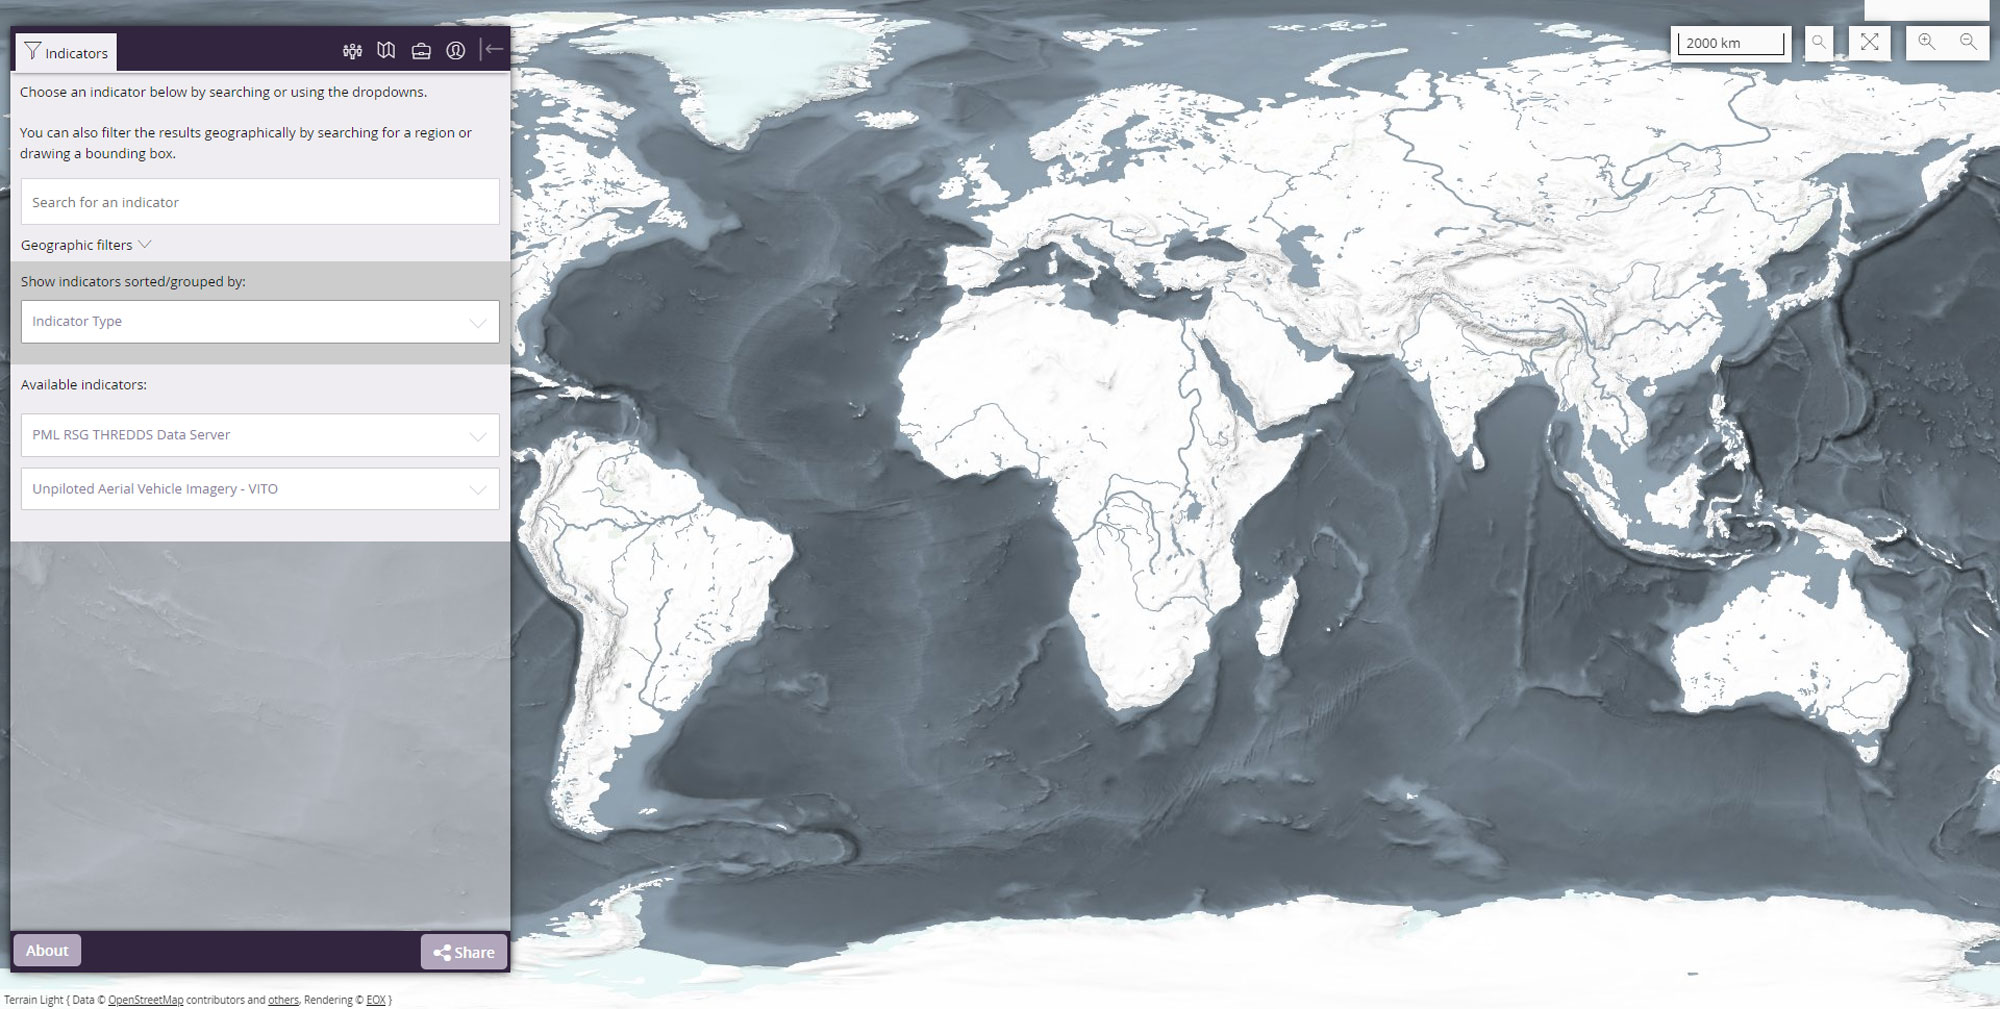 Screenshot of the data portal showing a world map with user interface to select data layers